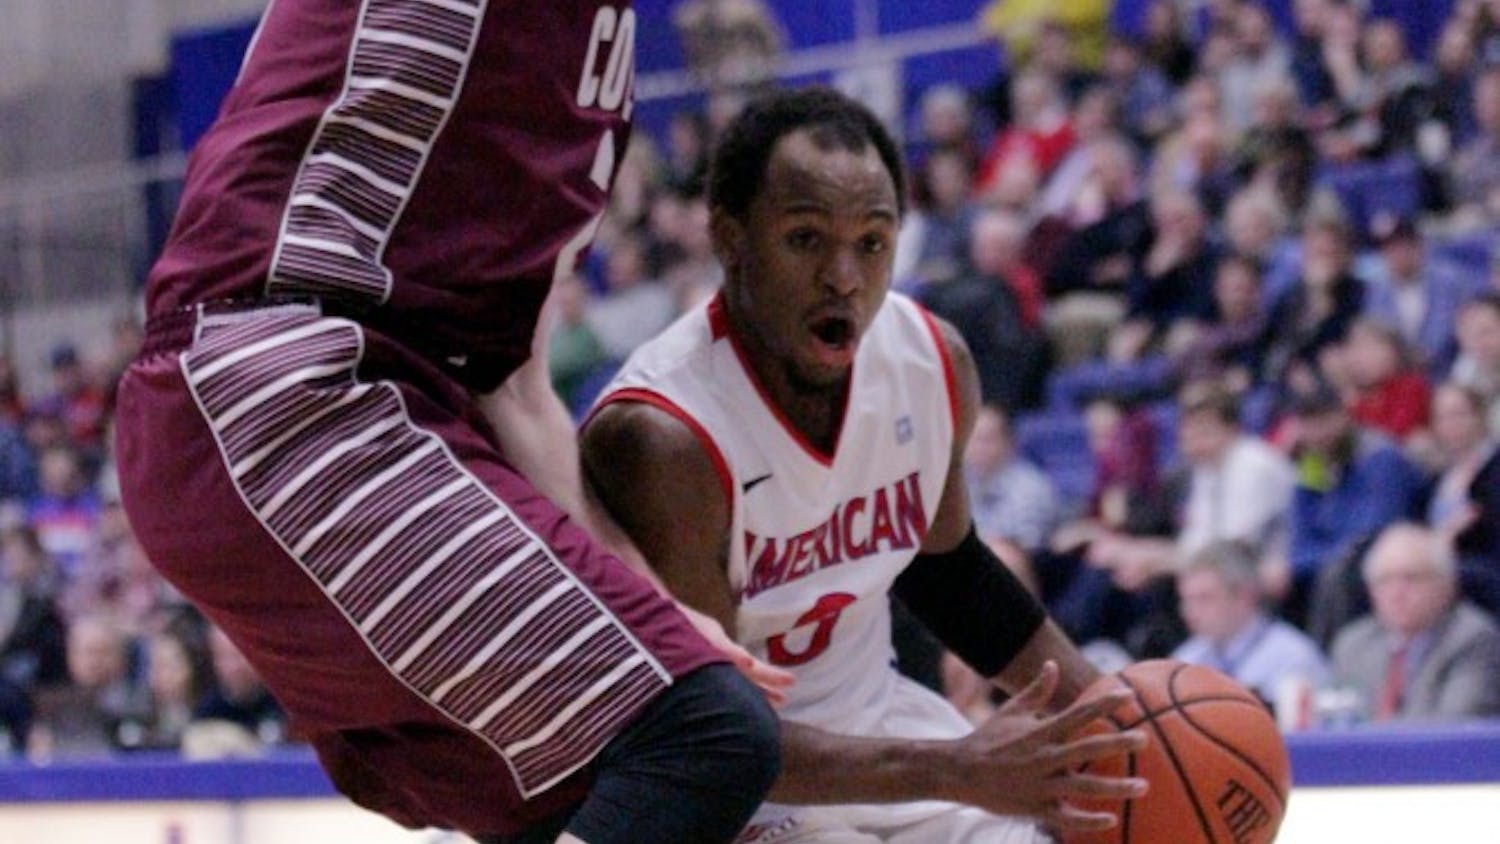 	Darius Gardner, seen here against Colgate, had 10 points in the win over Holy Cross